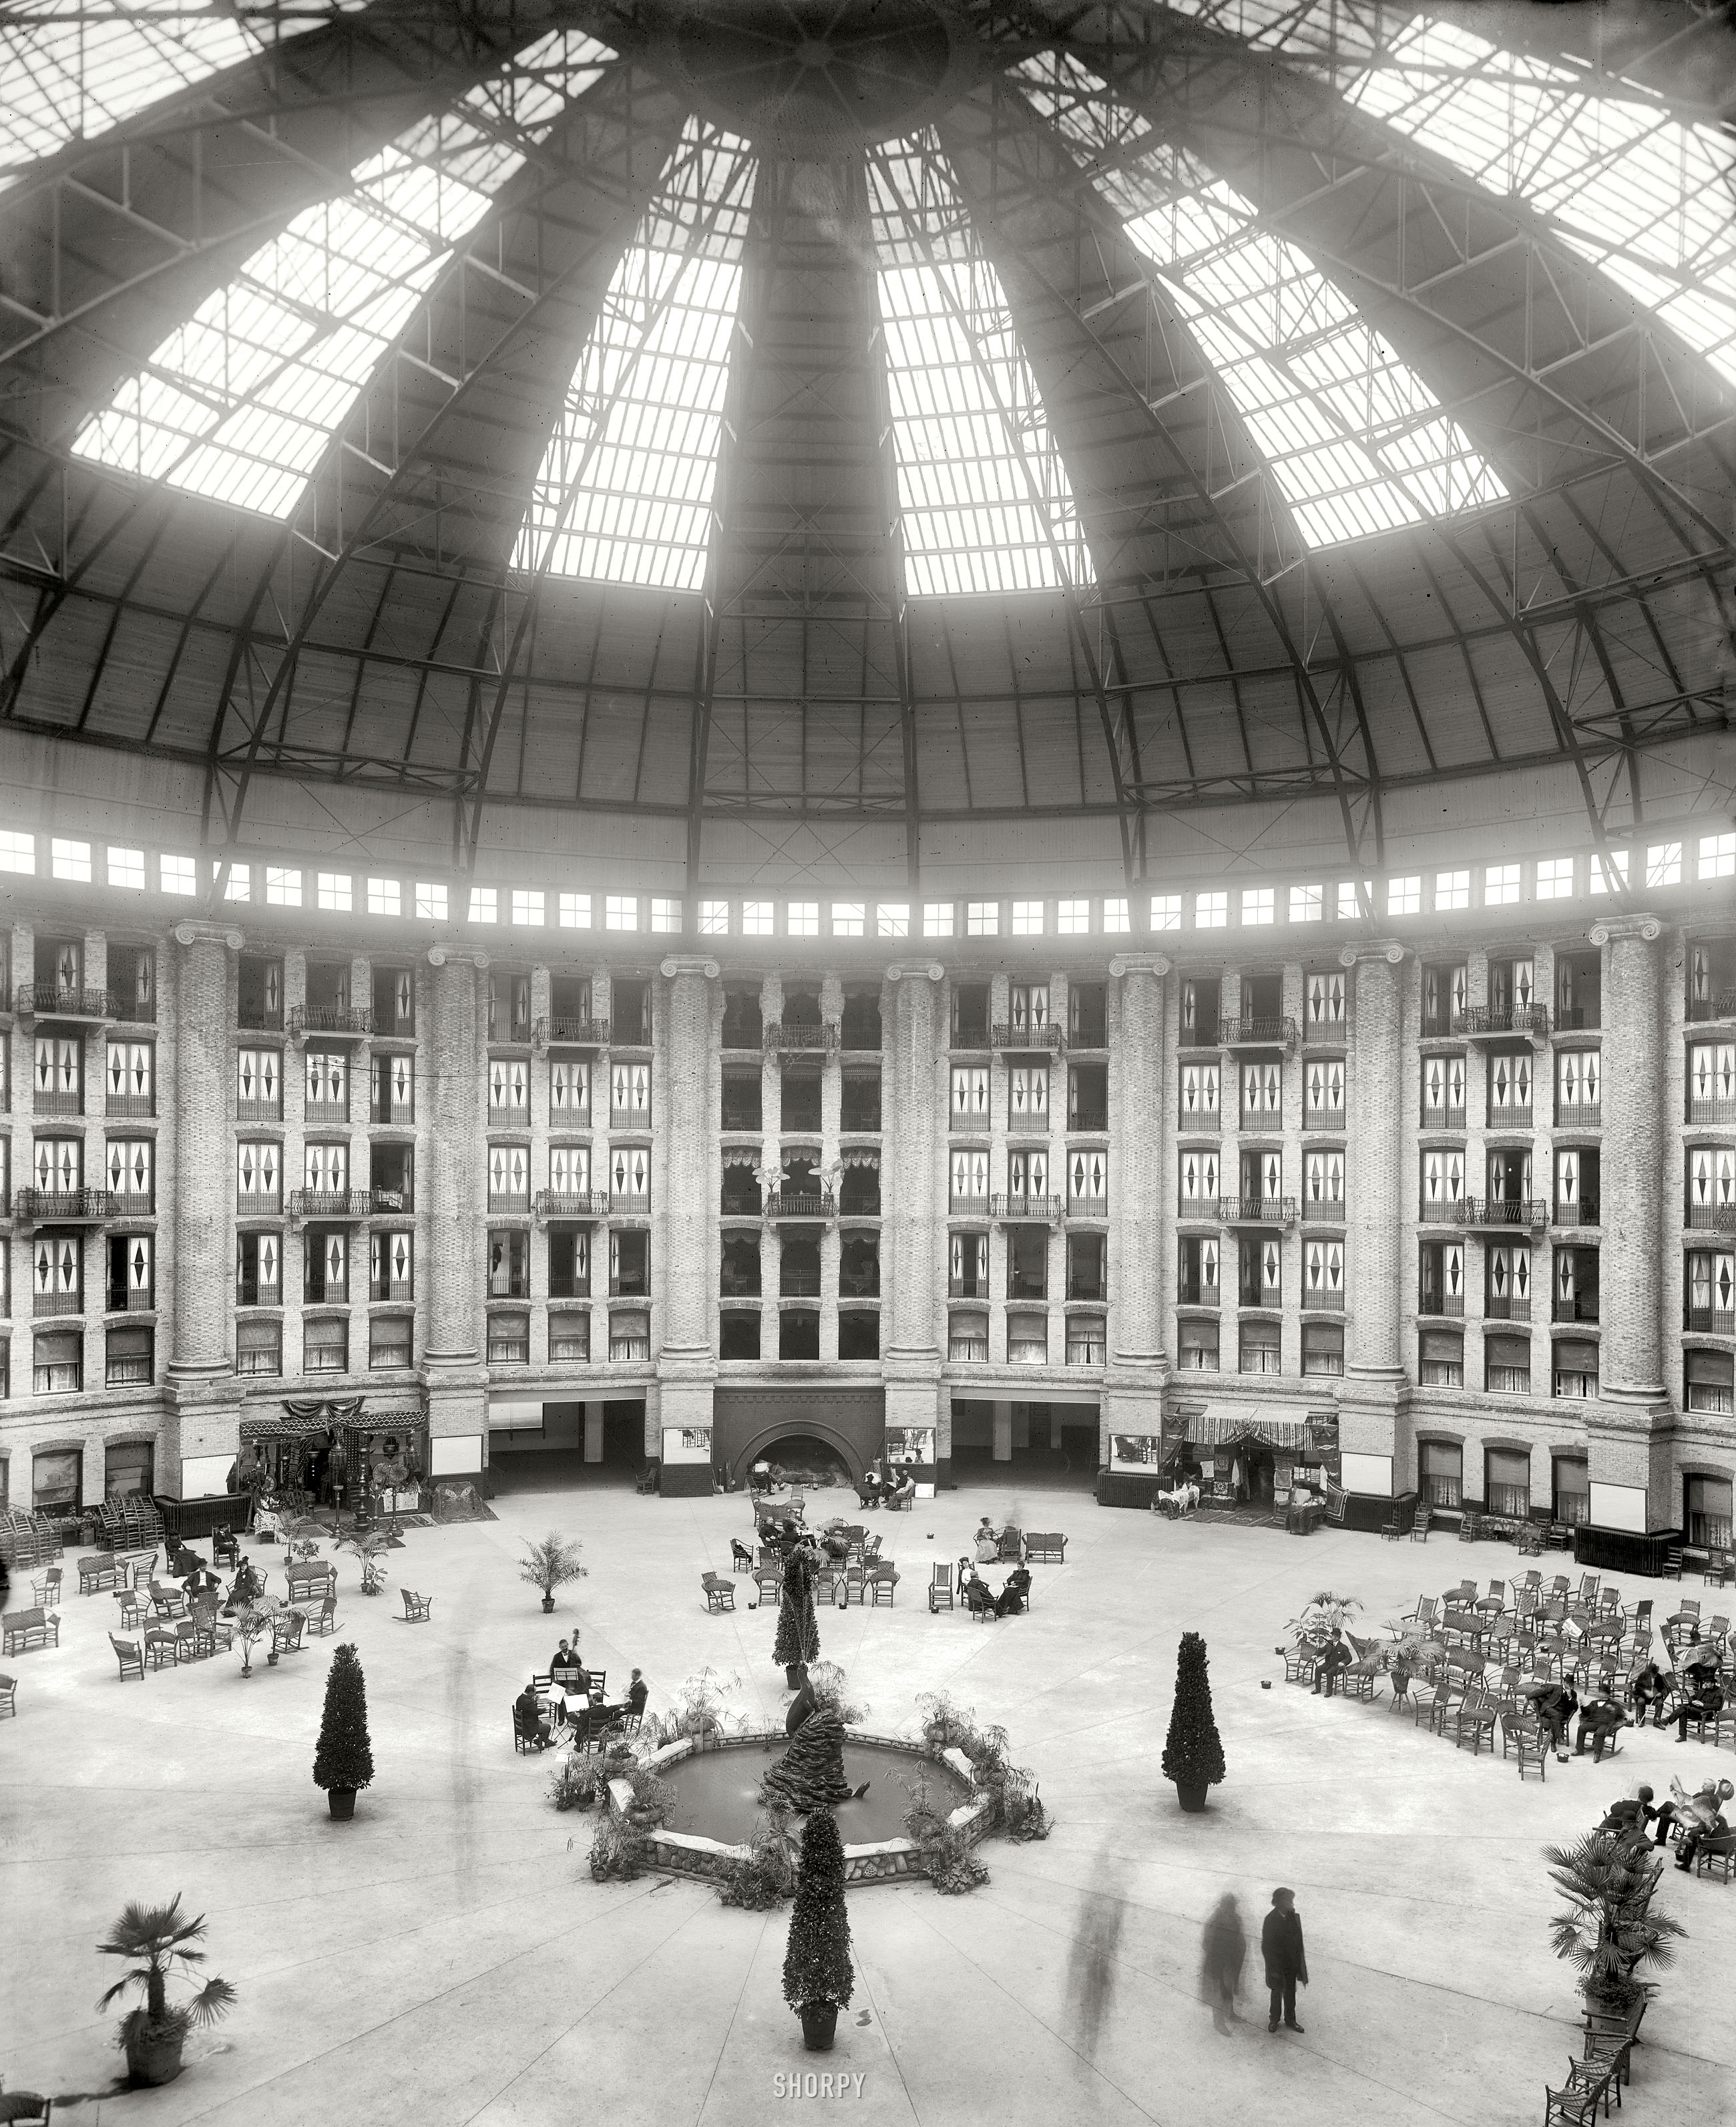 West Baden, Indiana, circa 1903. "The atrium, West Baden Springs Hotel." 8x10 glass negative by William Henry Jackson, Detroit Publishing Co. View full size.